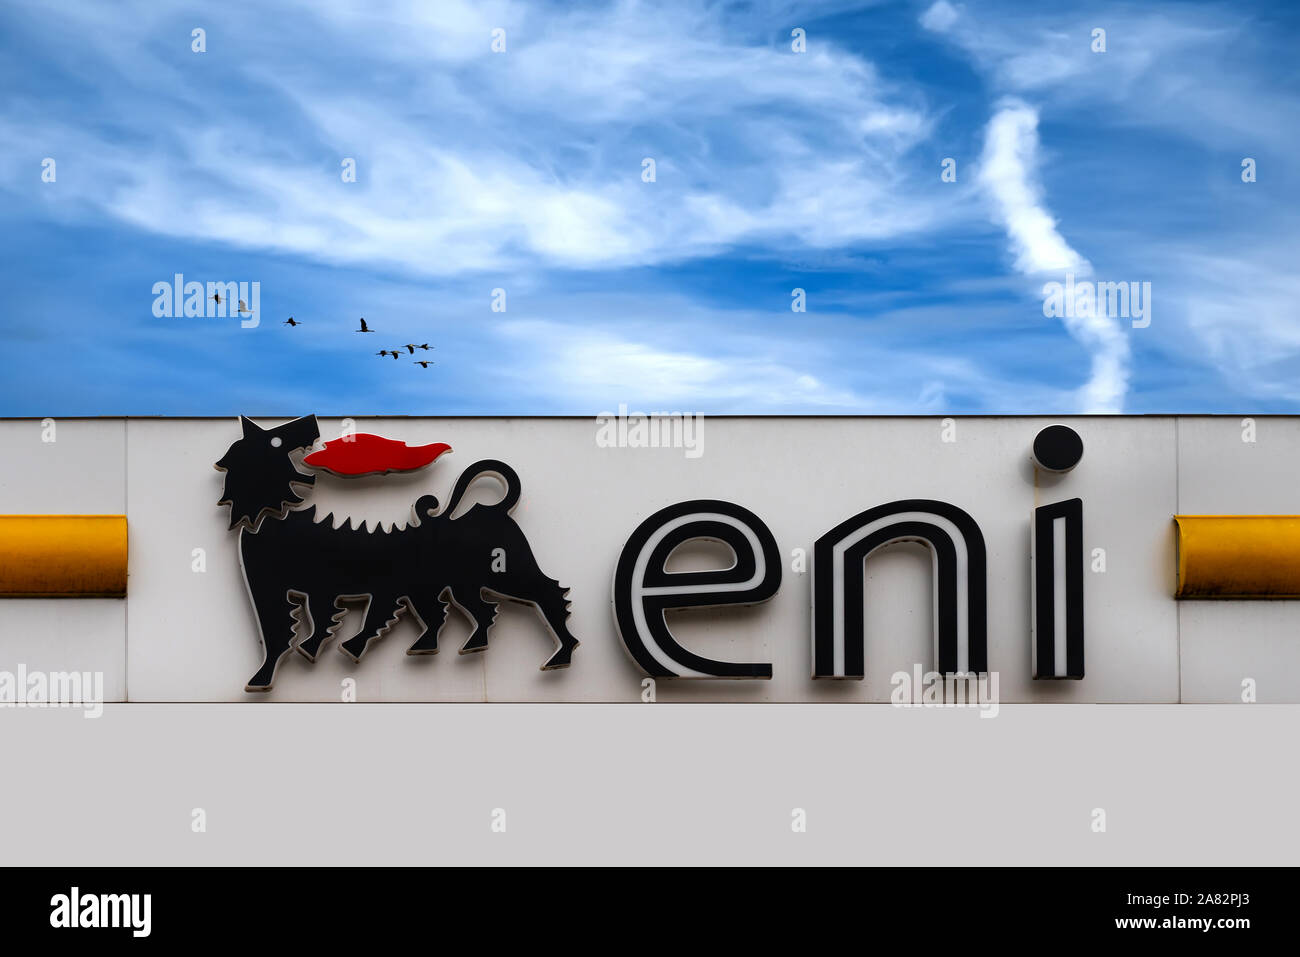 Bardolino, Italy - 10/31/2019: Eni S.p.A. in german Agip is an Italian multinational oil and gas company headquartered in Rome. Logo service station i Stock Photo